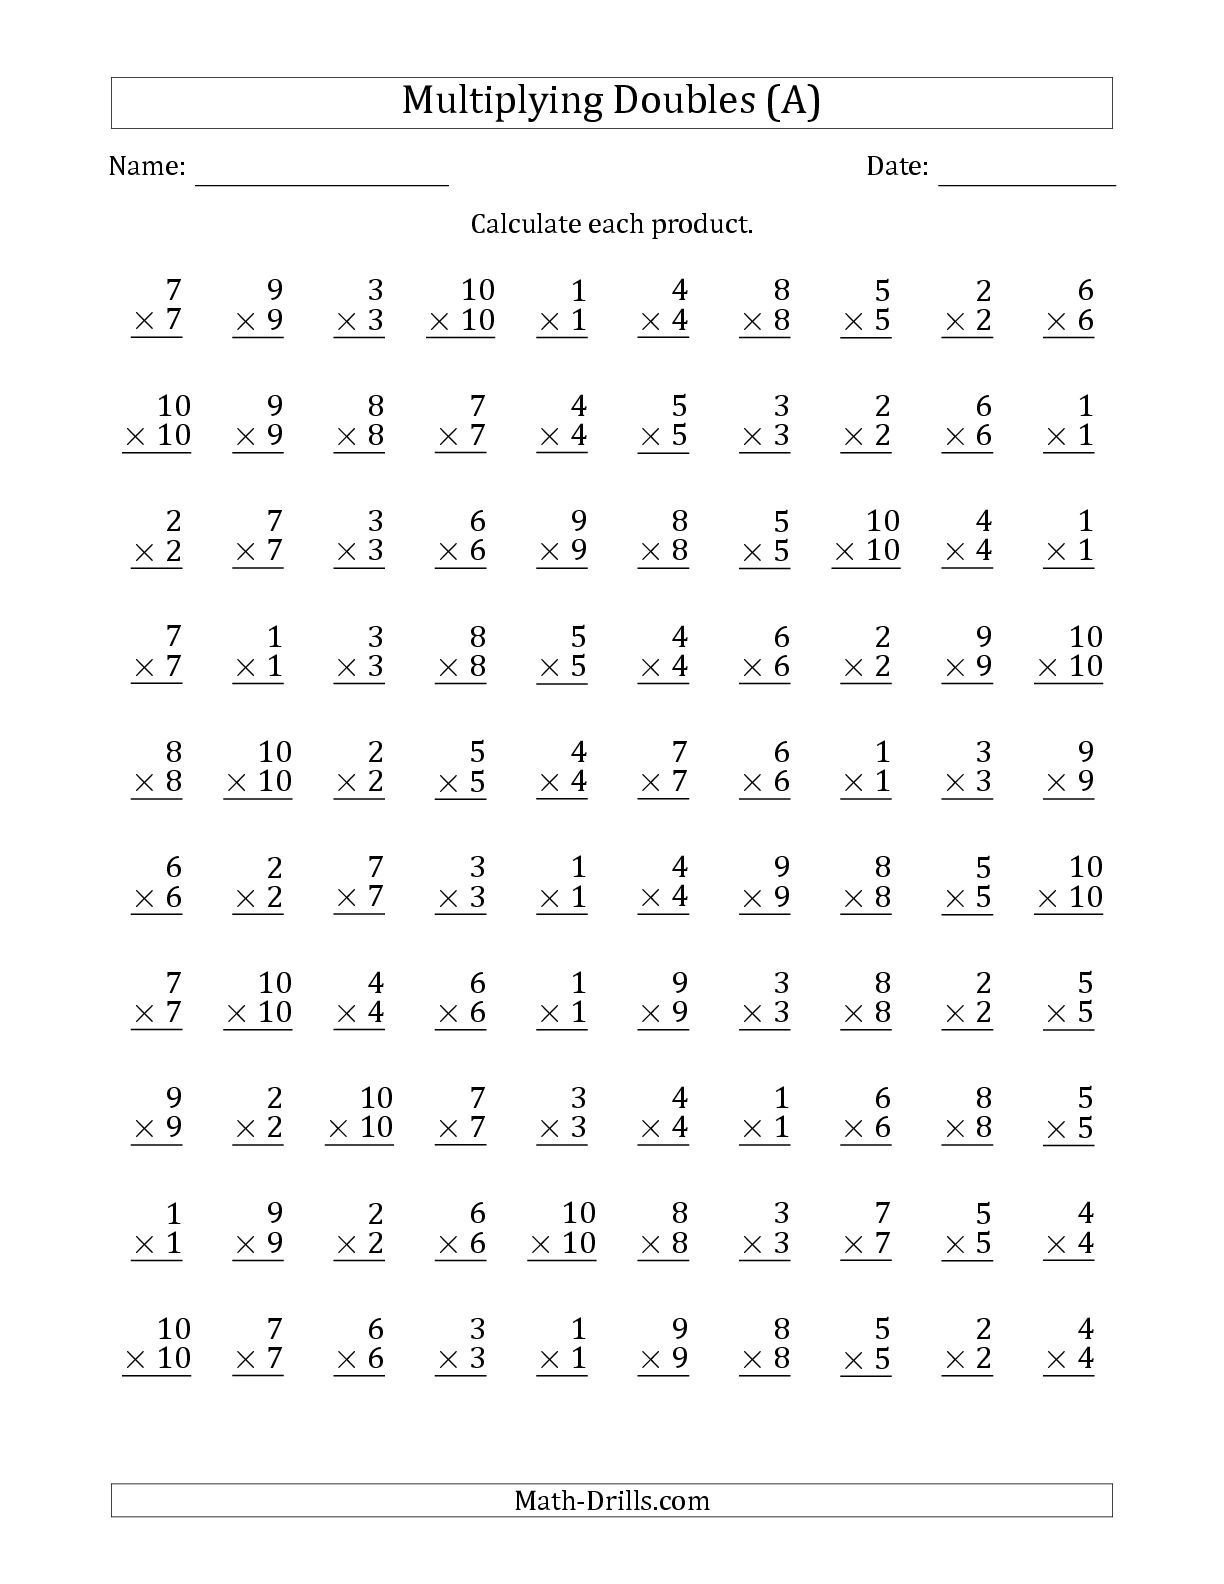 The Multiplying Doubles From 1 To 10 With 100 Questions Per throughout Printable 100 Question Multiplication Quiz